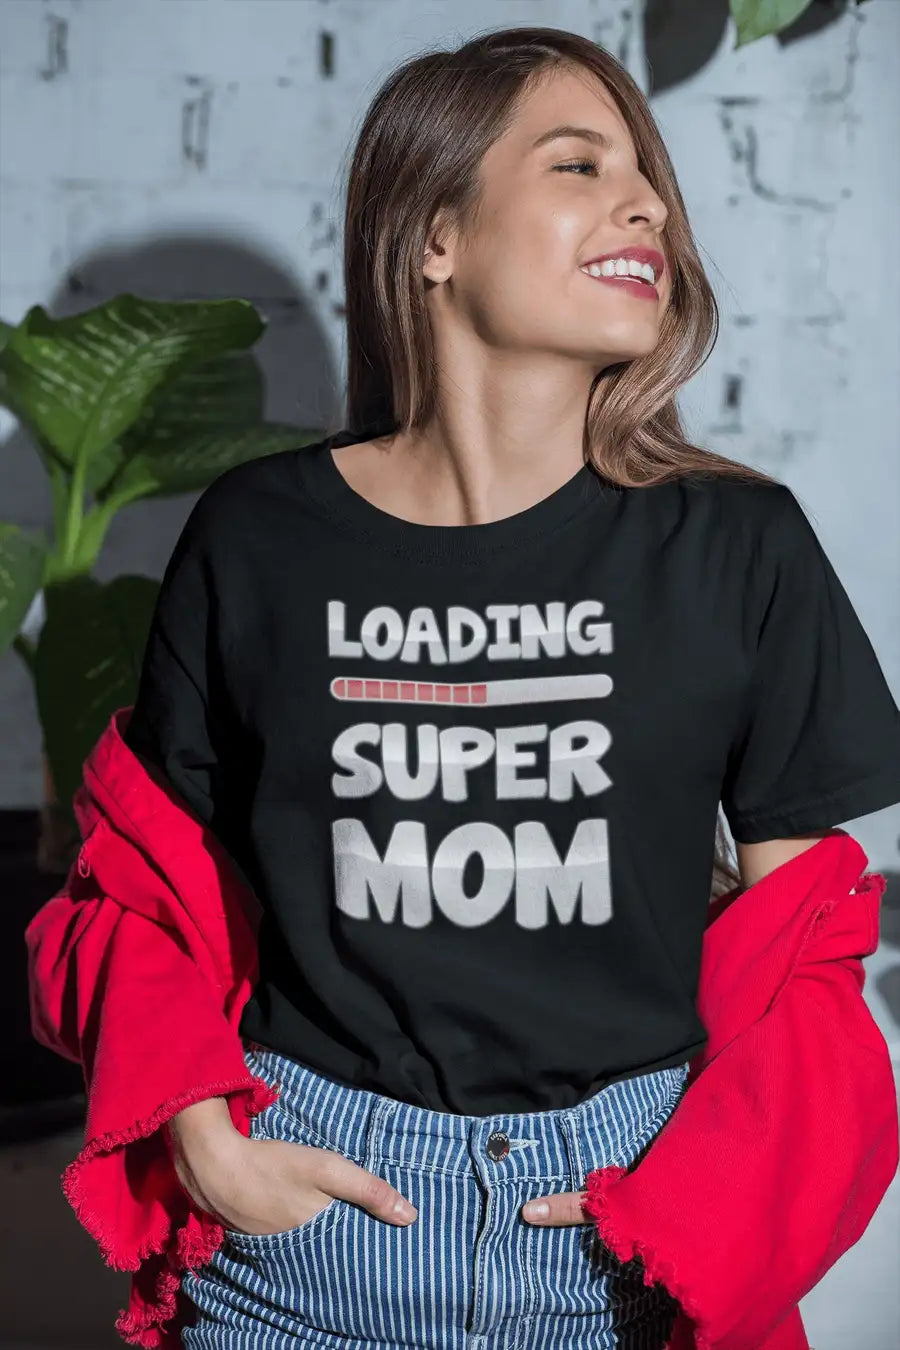 Loading Super Mom Black T Shirt for | Premium Design | Catch My Drift India - Catch My Drift India  black, clothing, expecting mom, father, made in india, mom, mother, parents, pregnancy, pre